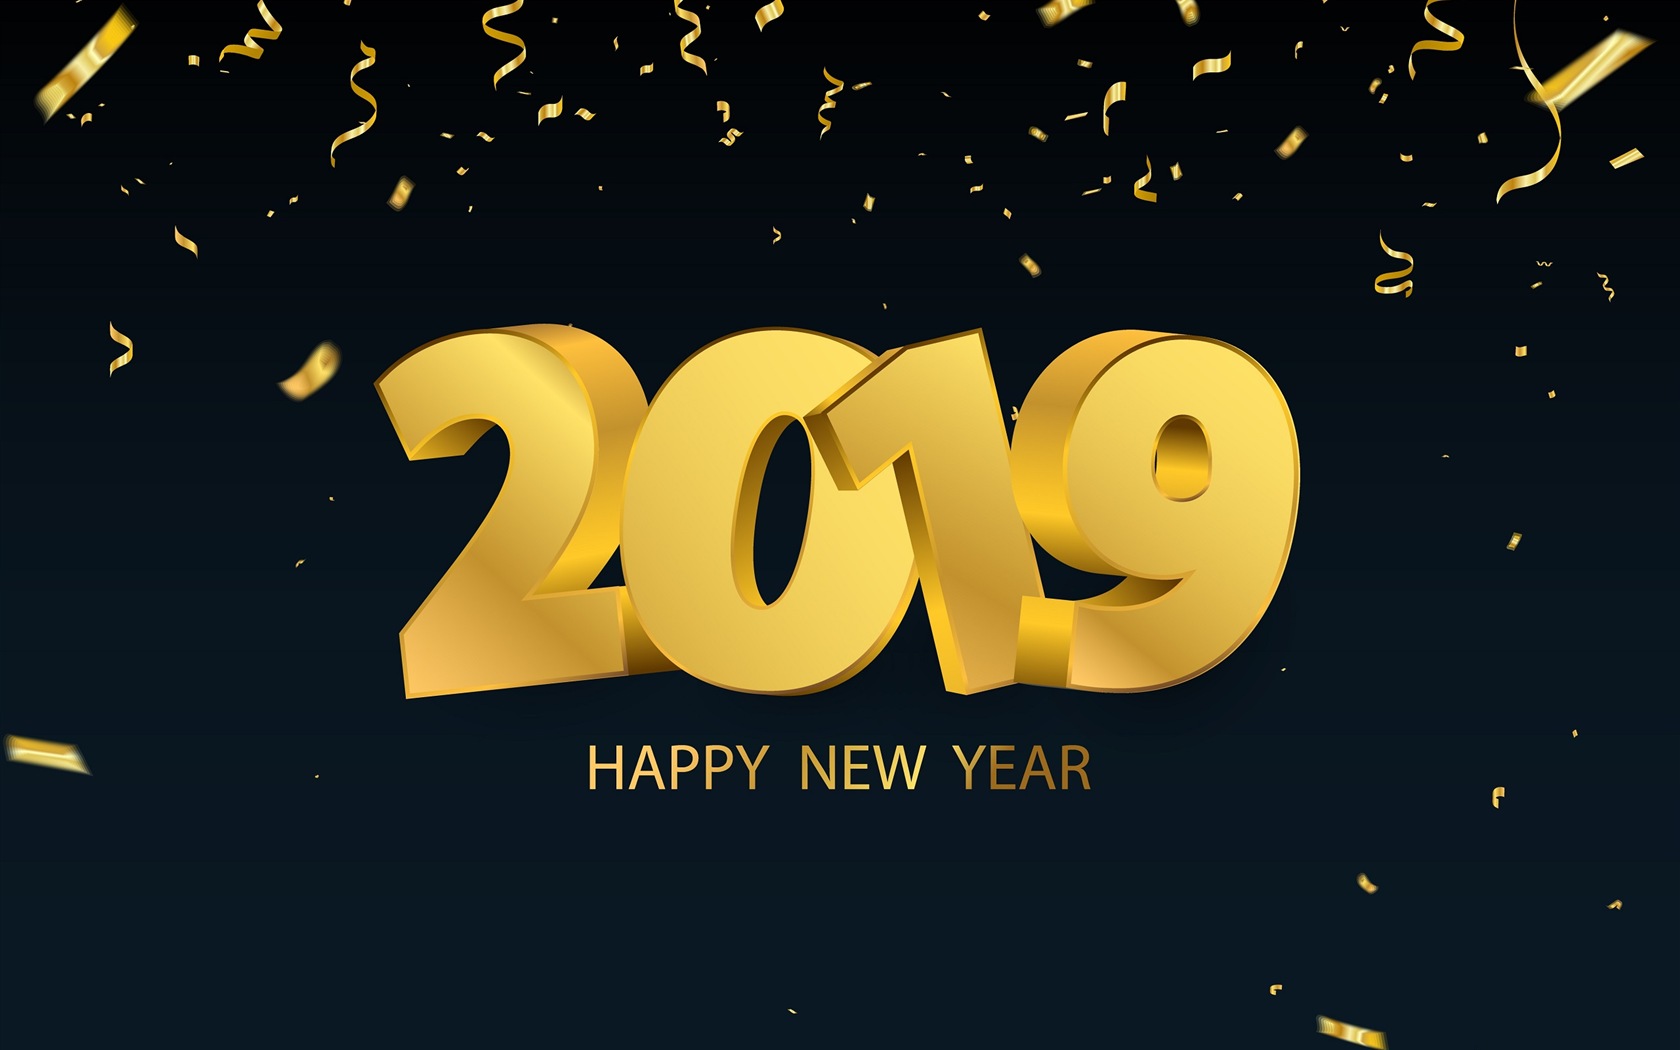 Happy New Year 2019 HD wallpapers #13 - 1680x1050